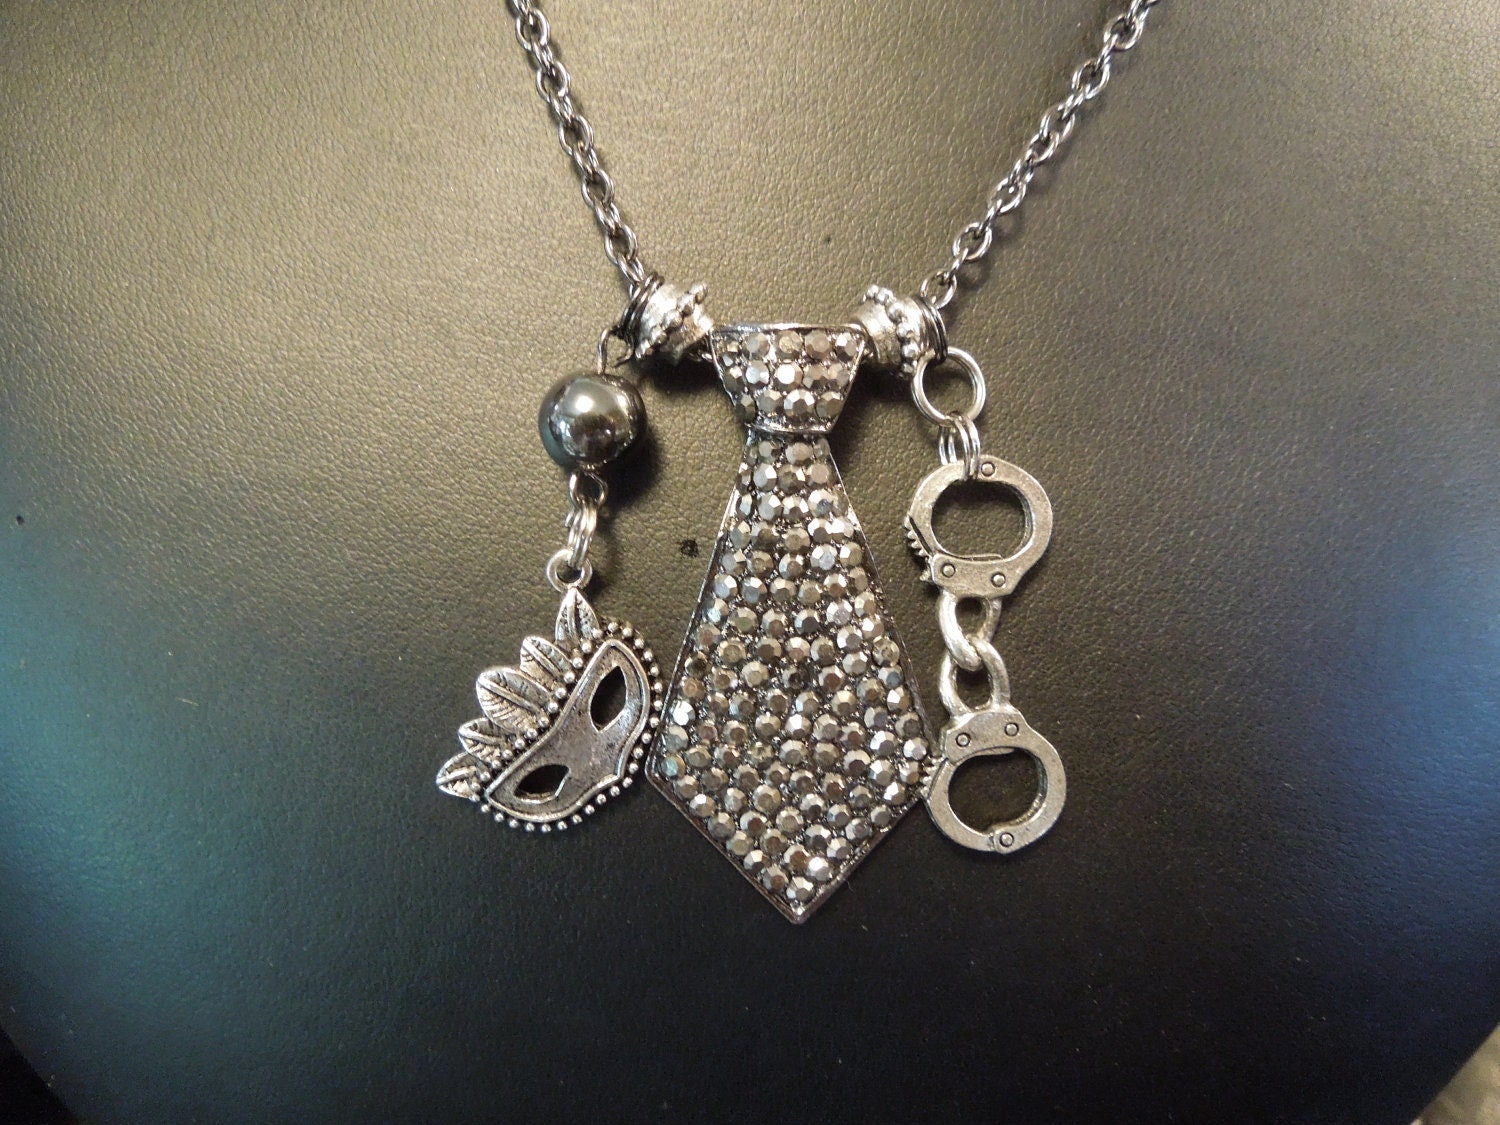 50 Shades of Grey Inspired Necklace